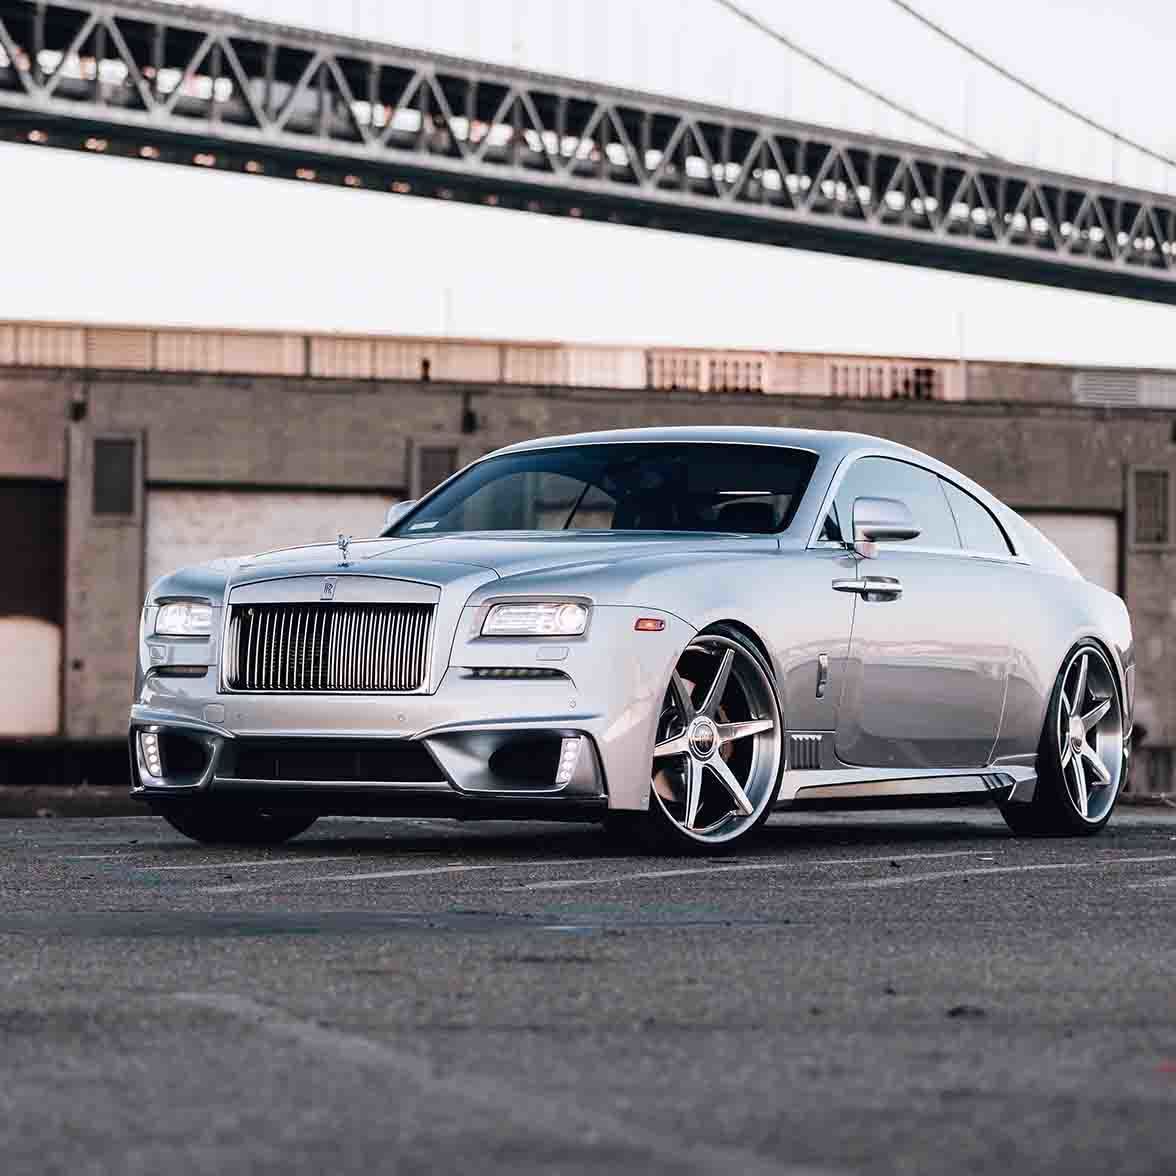 images-products-1-2857-232975145-silver-rolls-royce-wraith-brixton-forged-s60-targa-series-forged-wheels-brushed-gloss-010.jpg